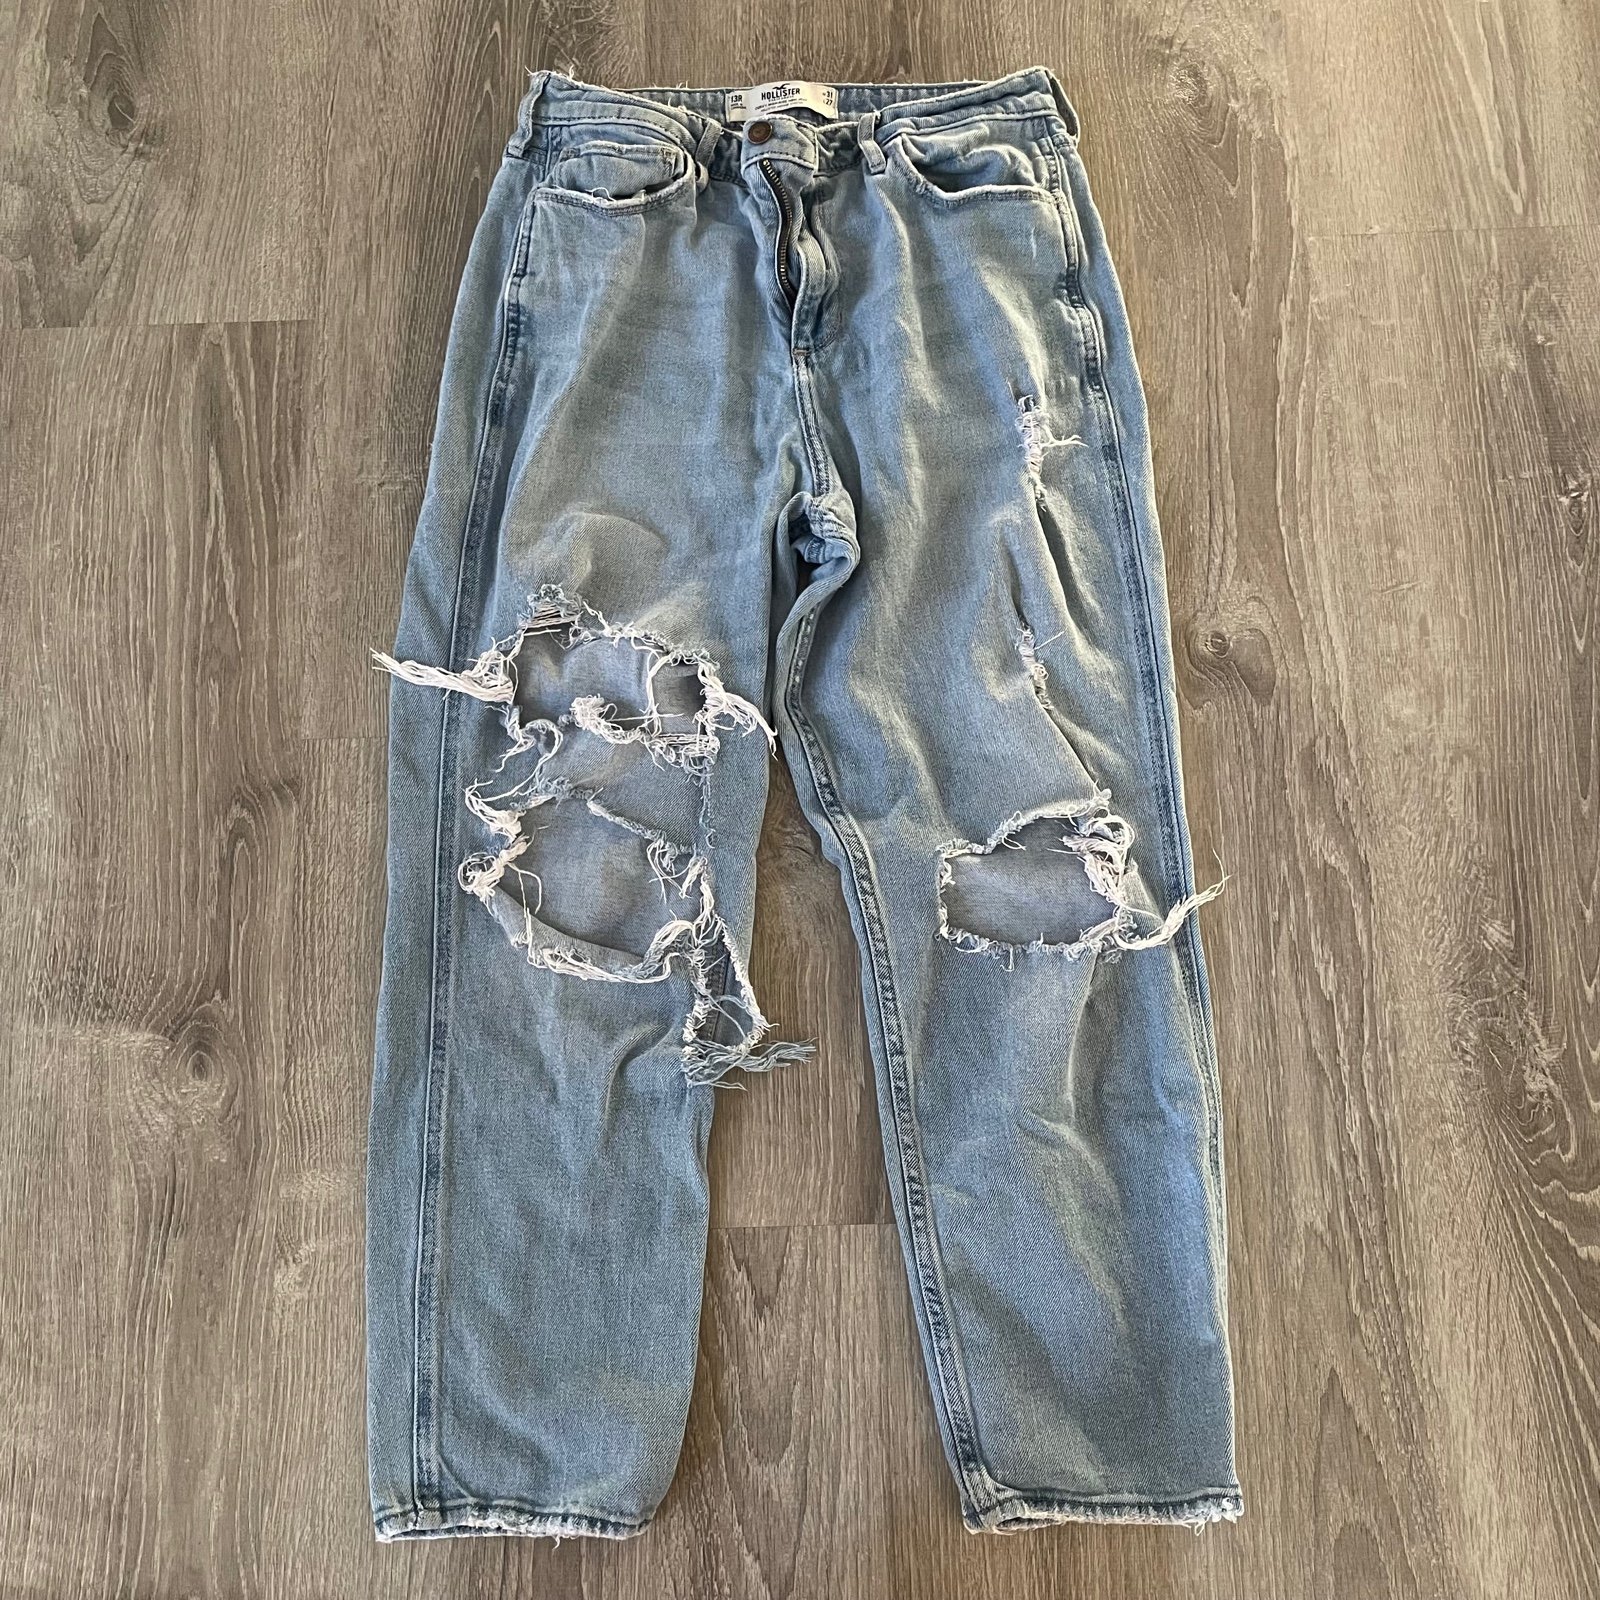 Classic Hollister Womens Distress Jeans Size 13 R 31x27 IPAAkldyz Outlet Store